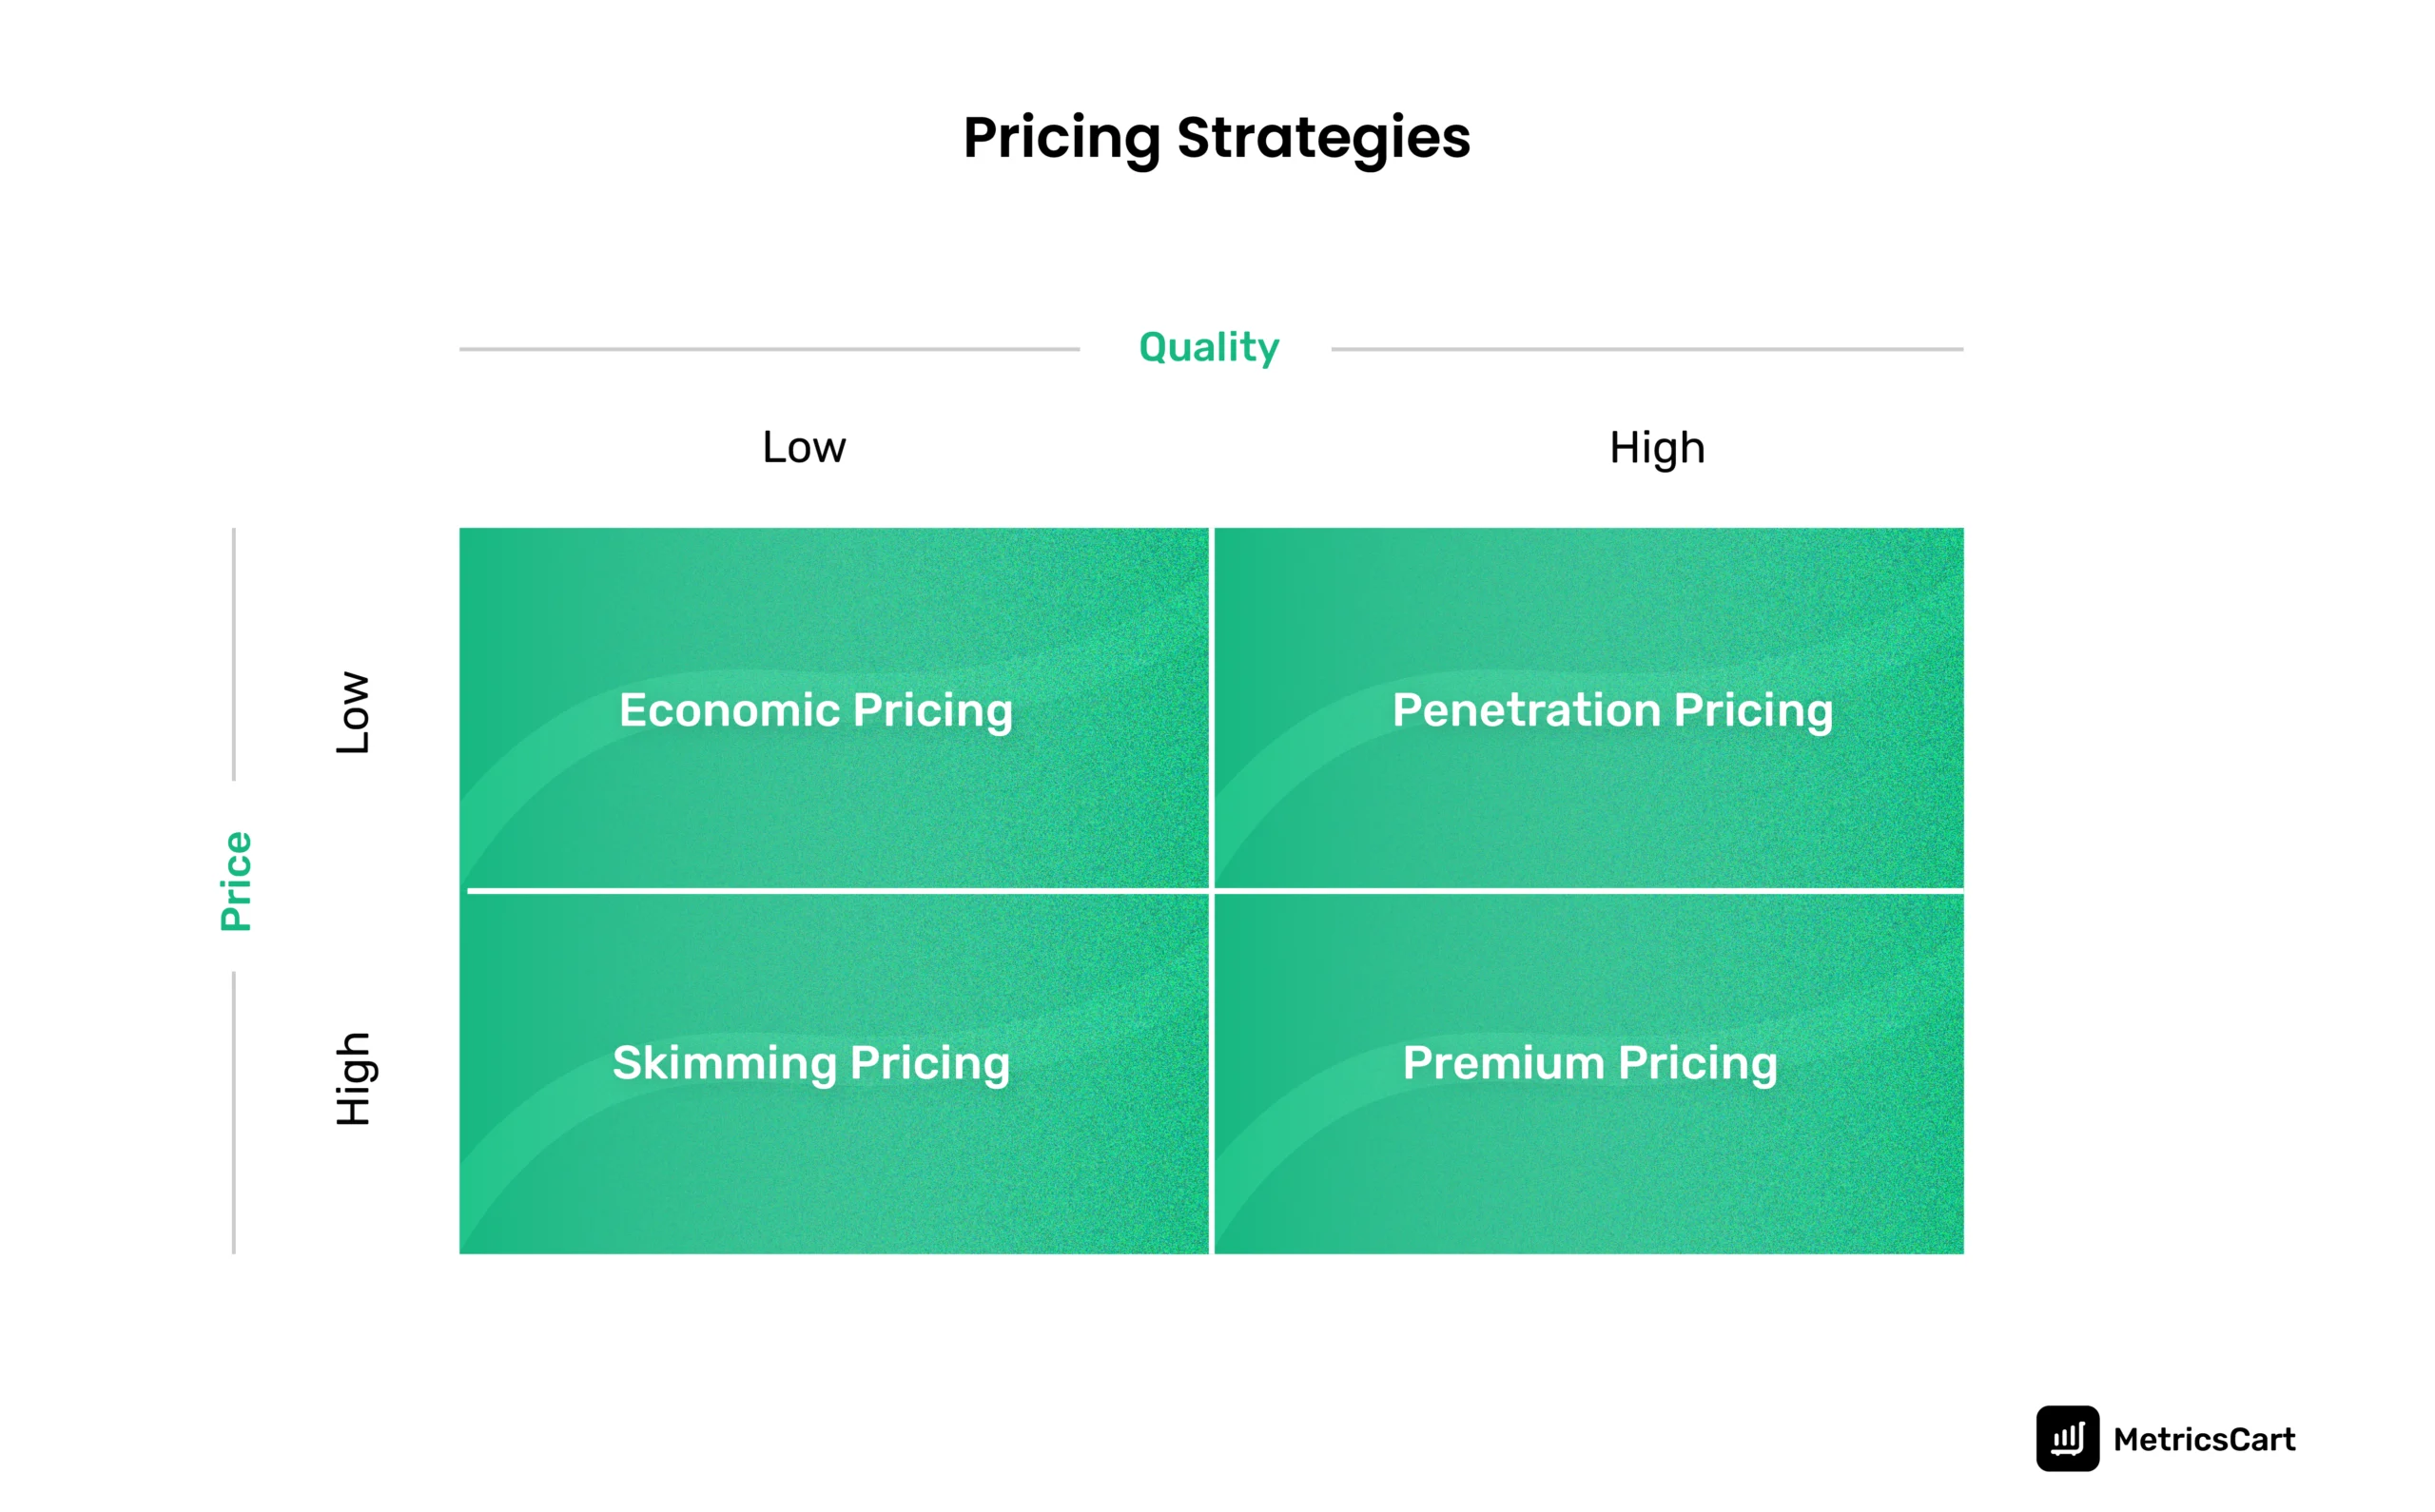 A pictorial description of how different pricing strategies work keeping price and quality as parameters.